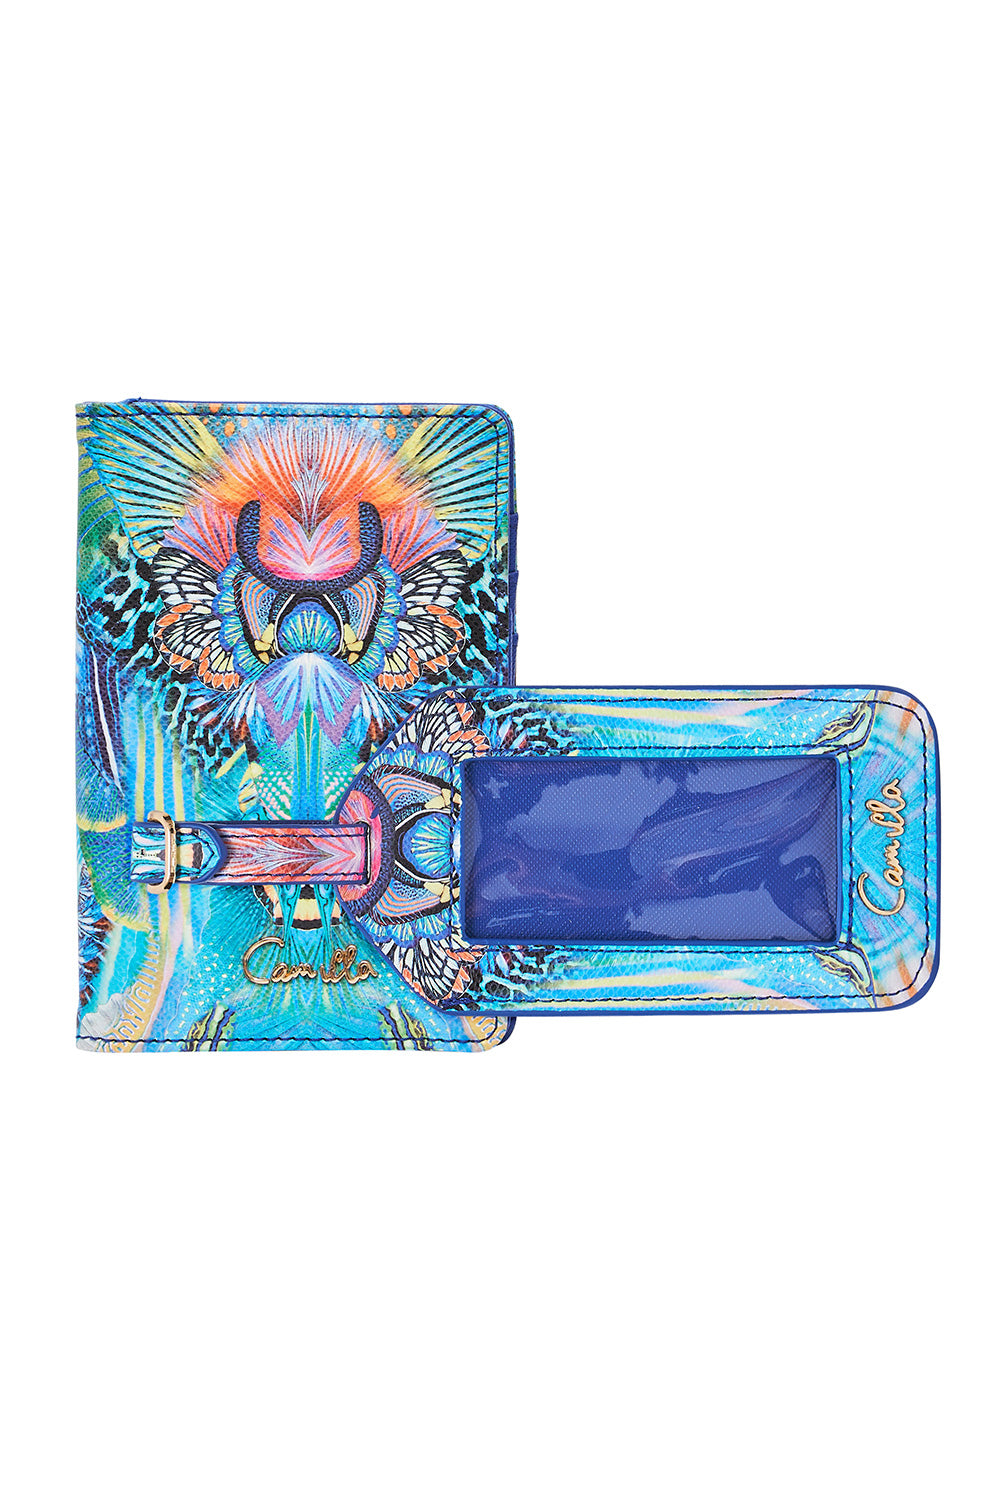 PASSPORT HOLDER AND LUGGAGE TAG REEF WARRIOR